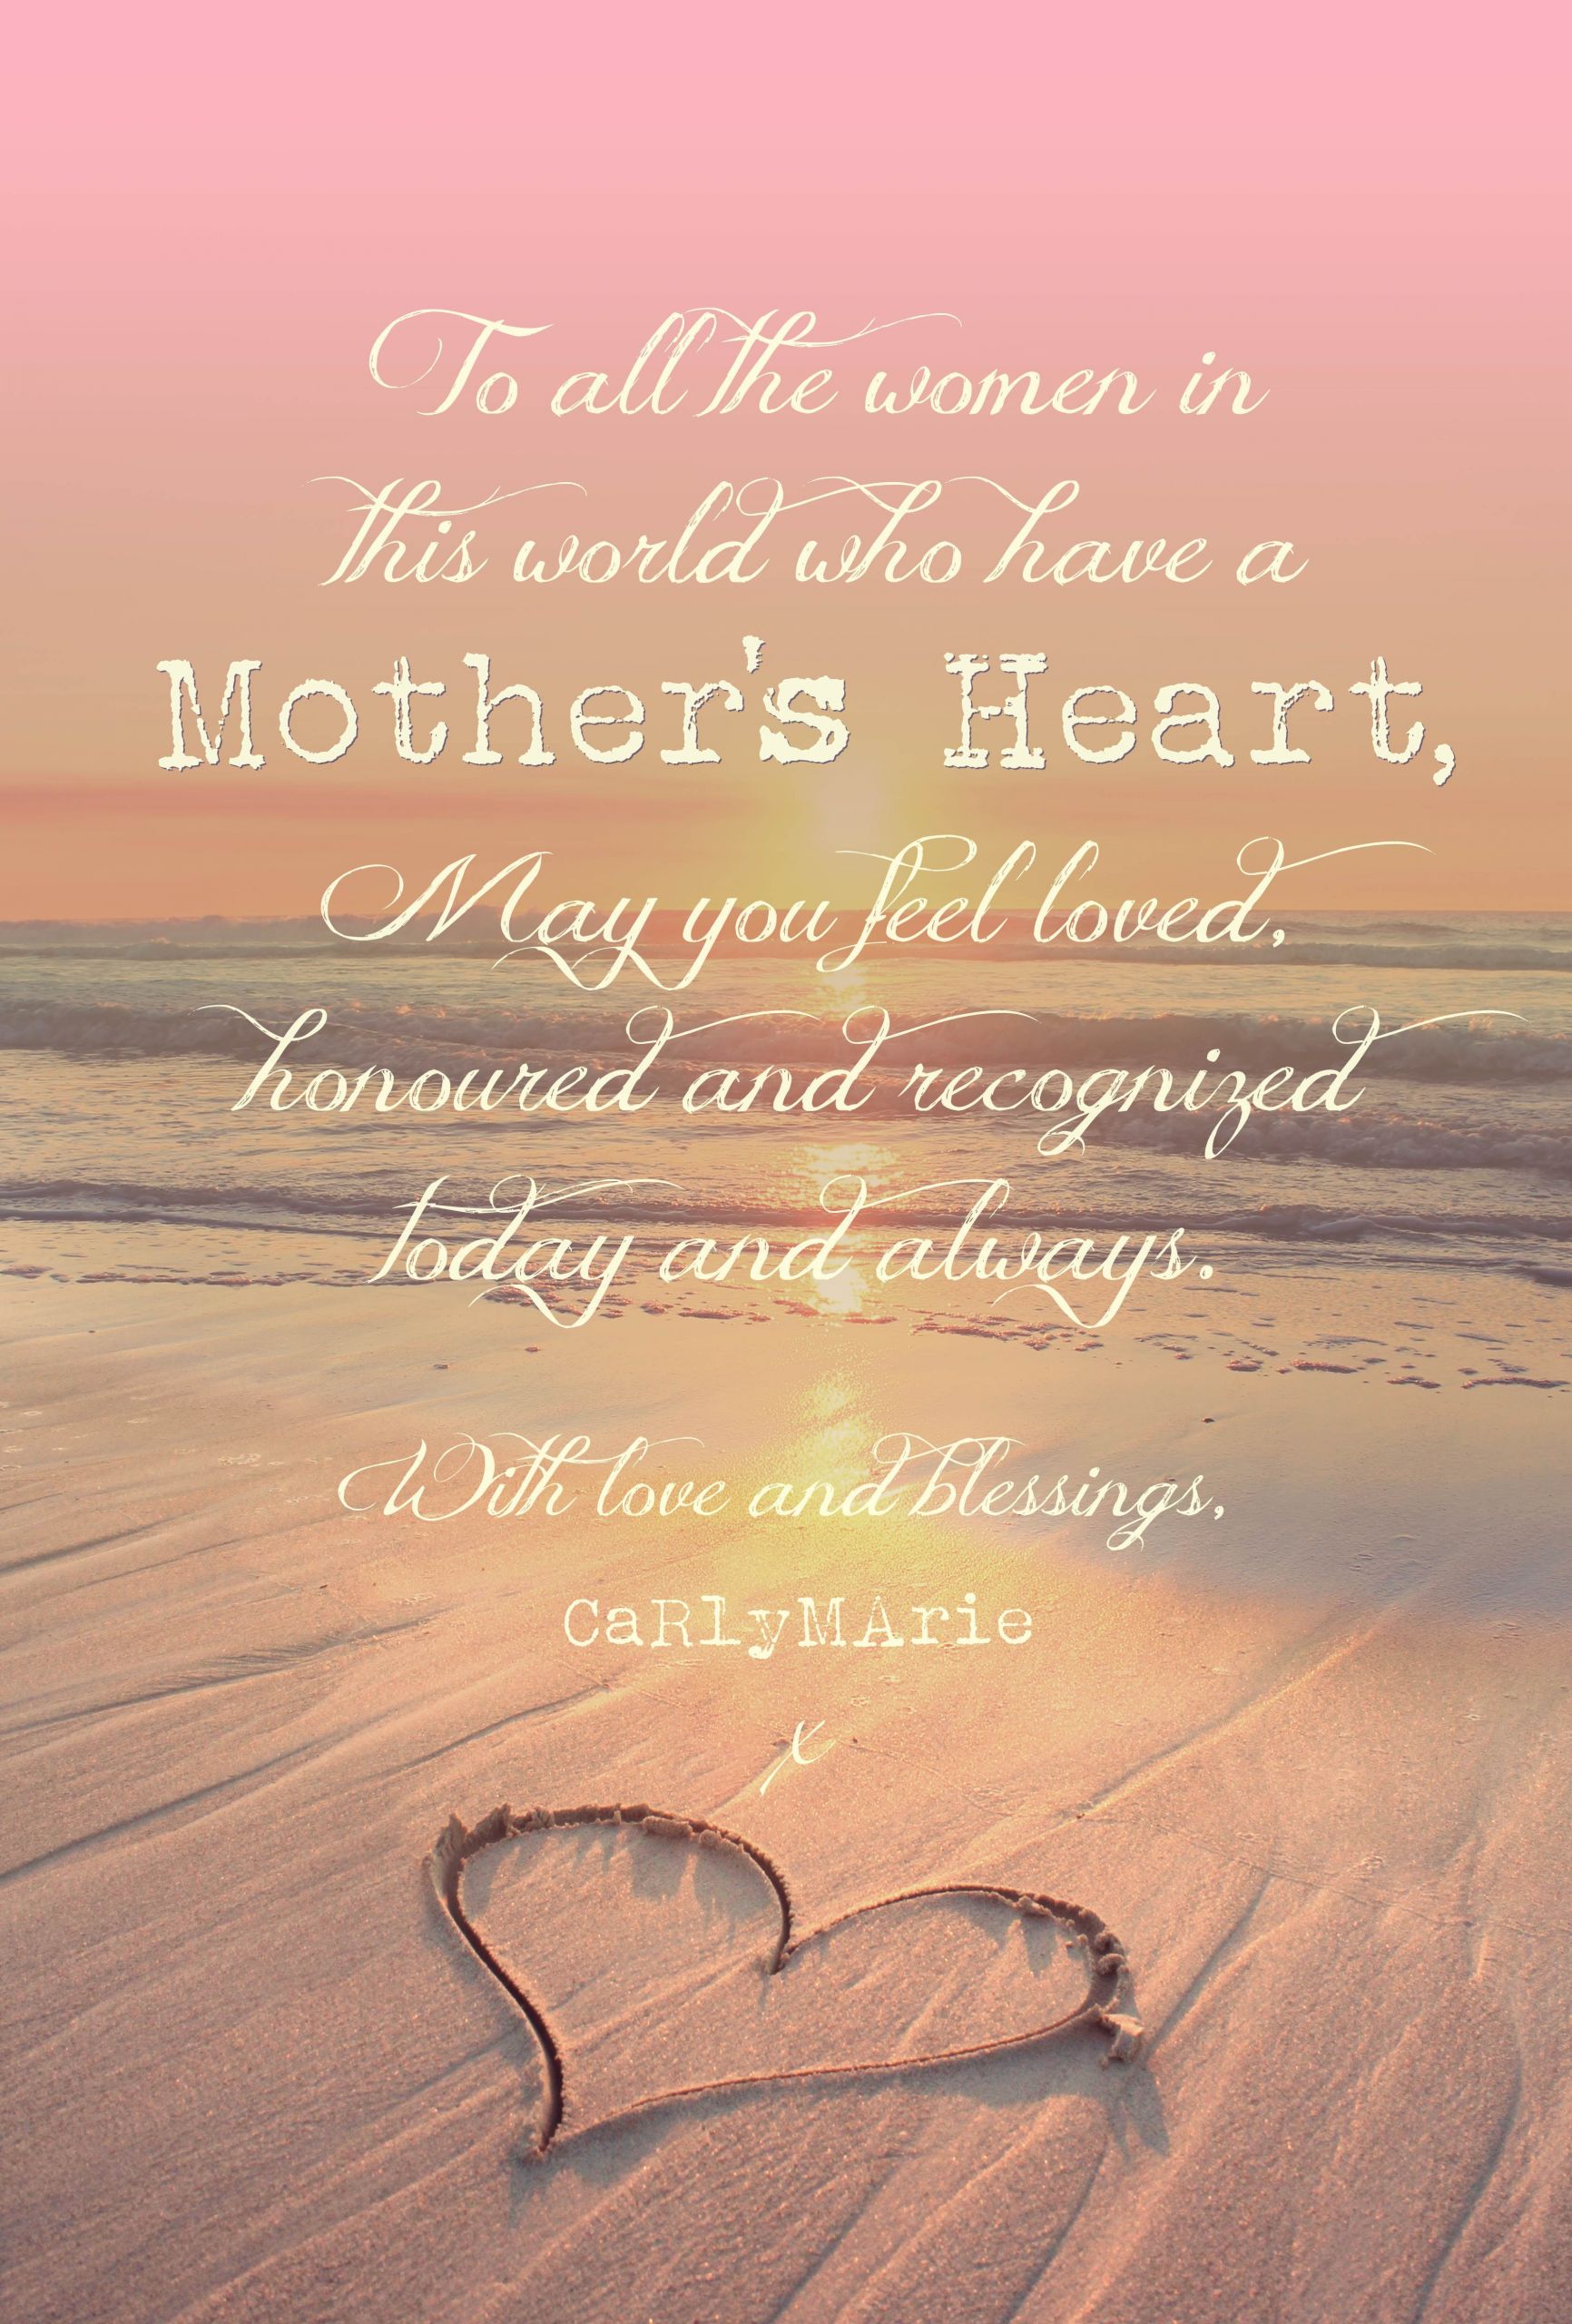 Quotes About Loss Of A Mother
 Loss Mother Quotes QuotesGram